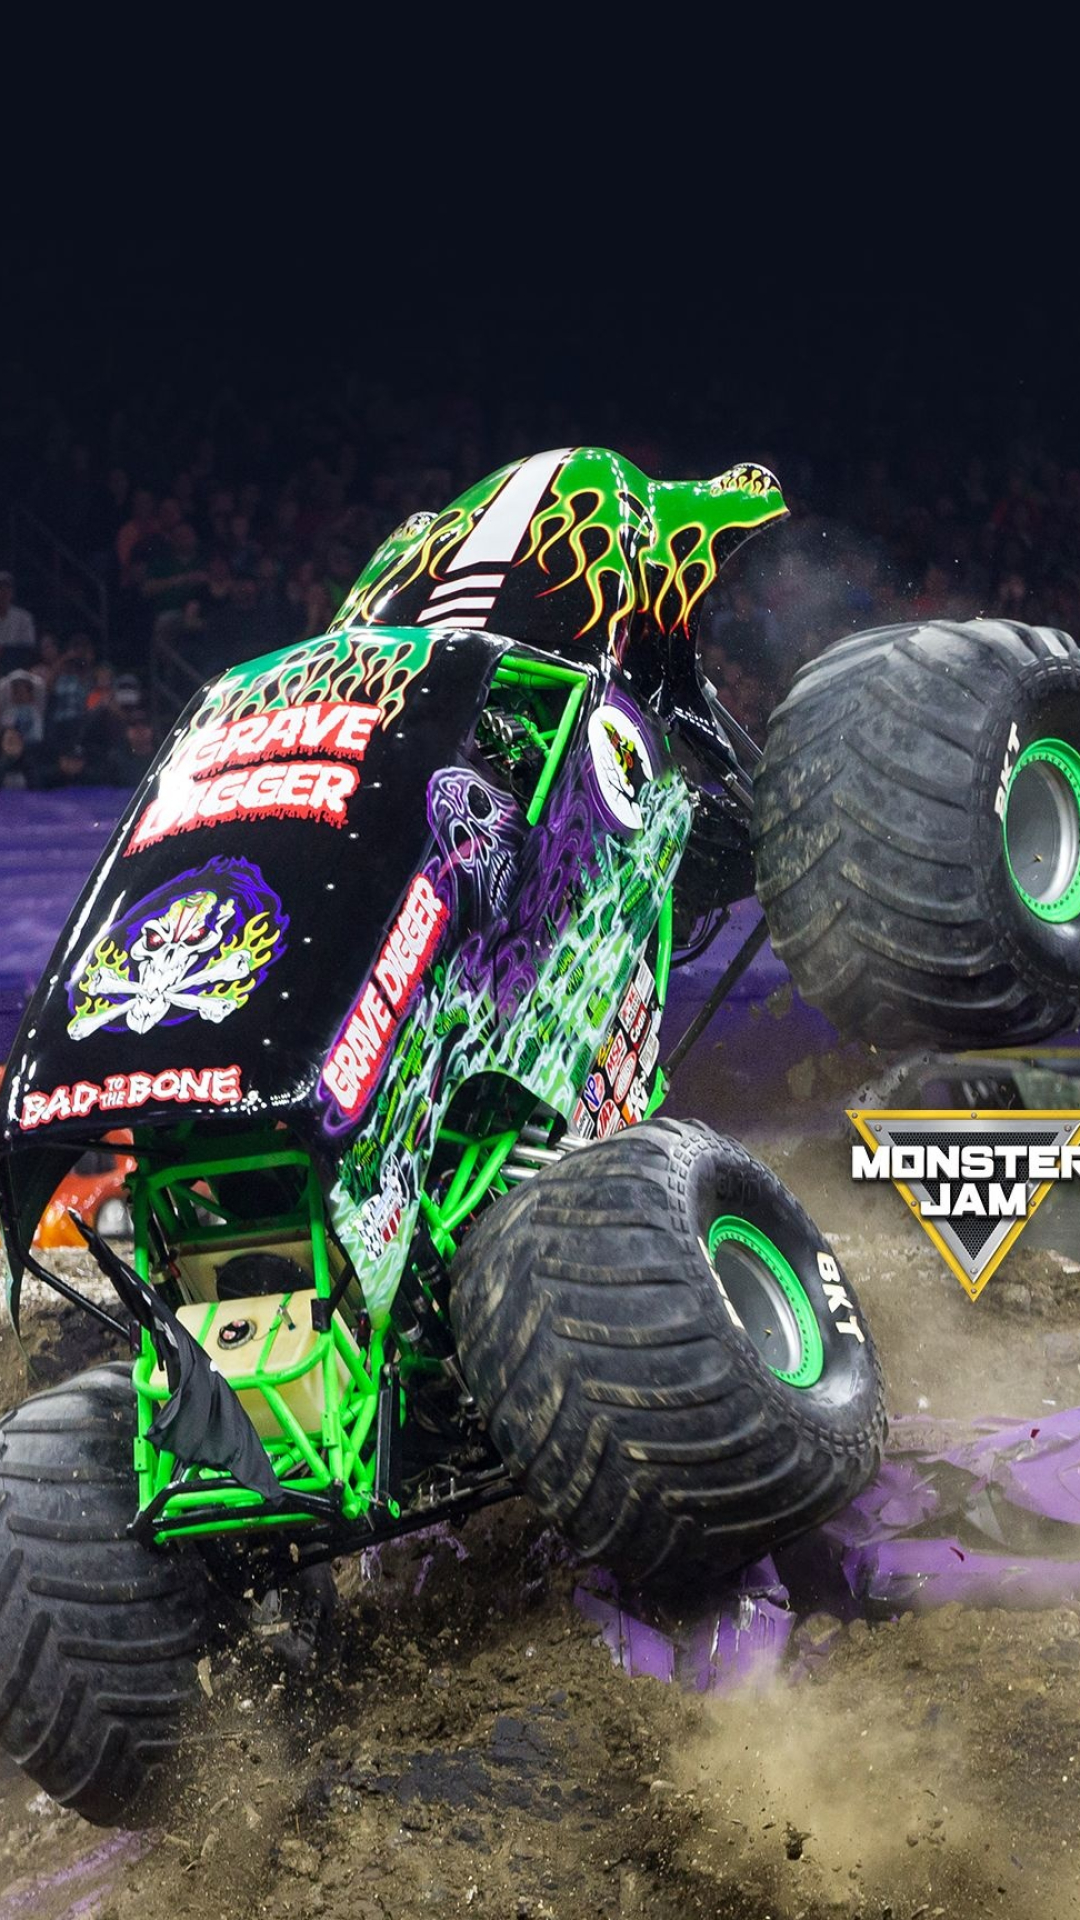 Monster Truck: Grave Digger, The truck's wild reputation, Green flames, Letters dripping blood, A foggy graveyard scene. 1080x1920 Full HD Wallpaper.